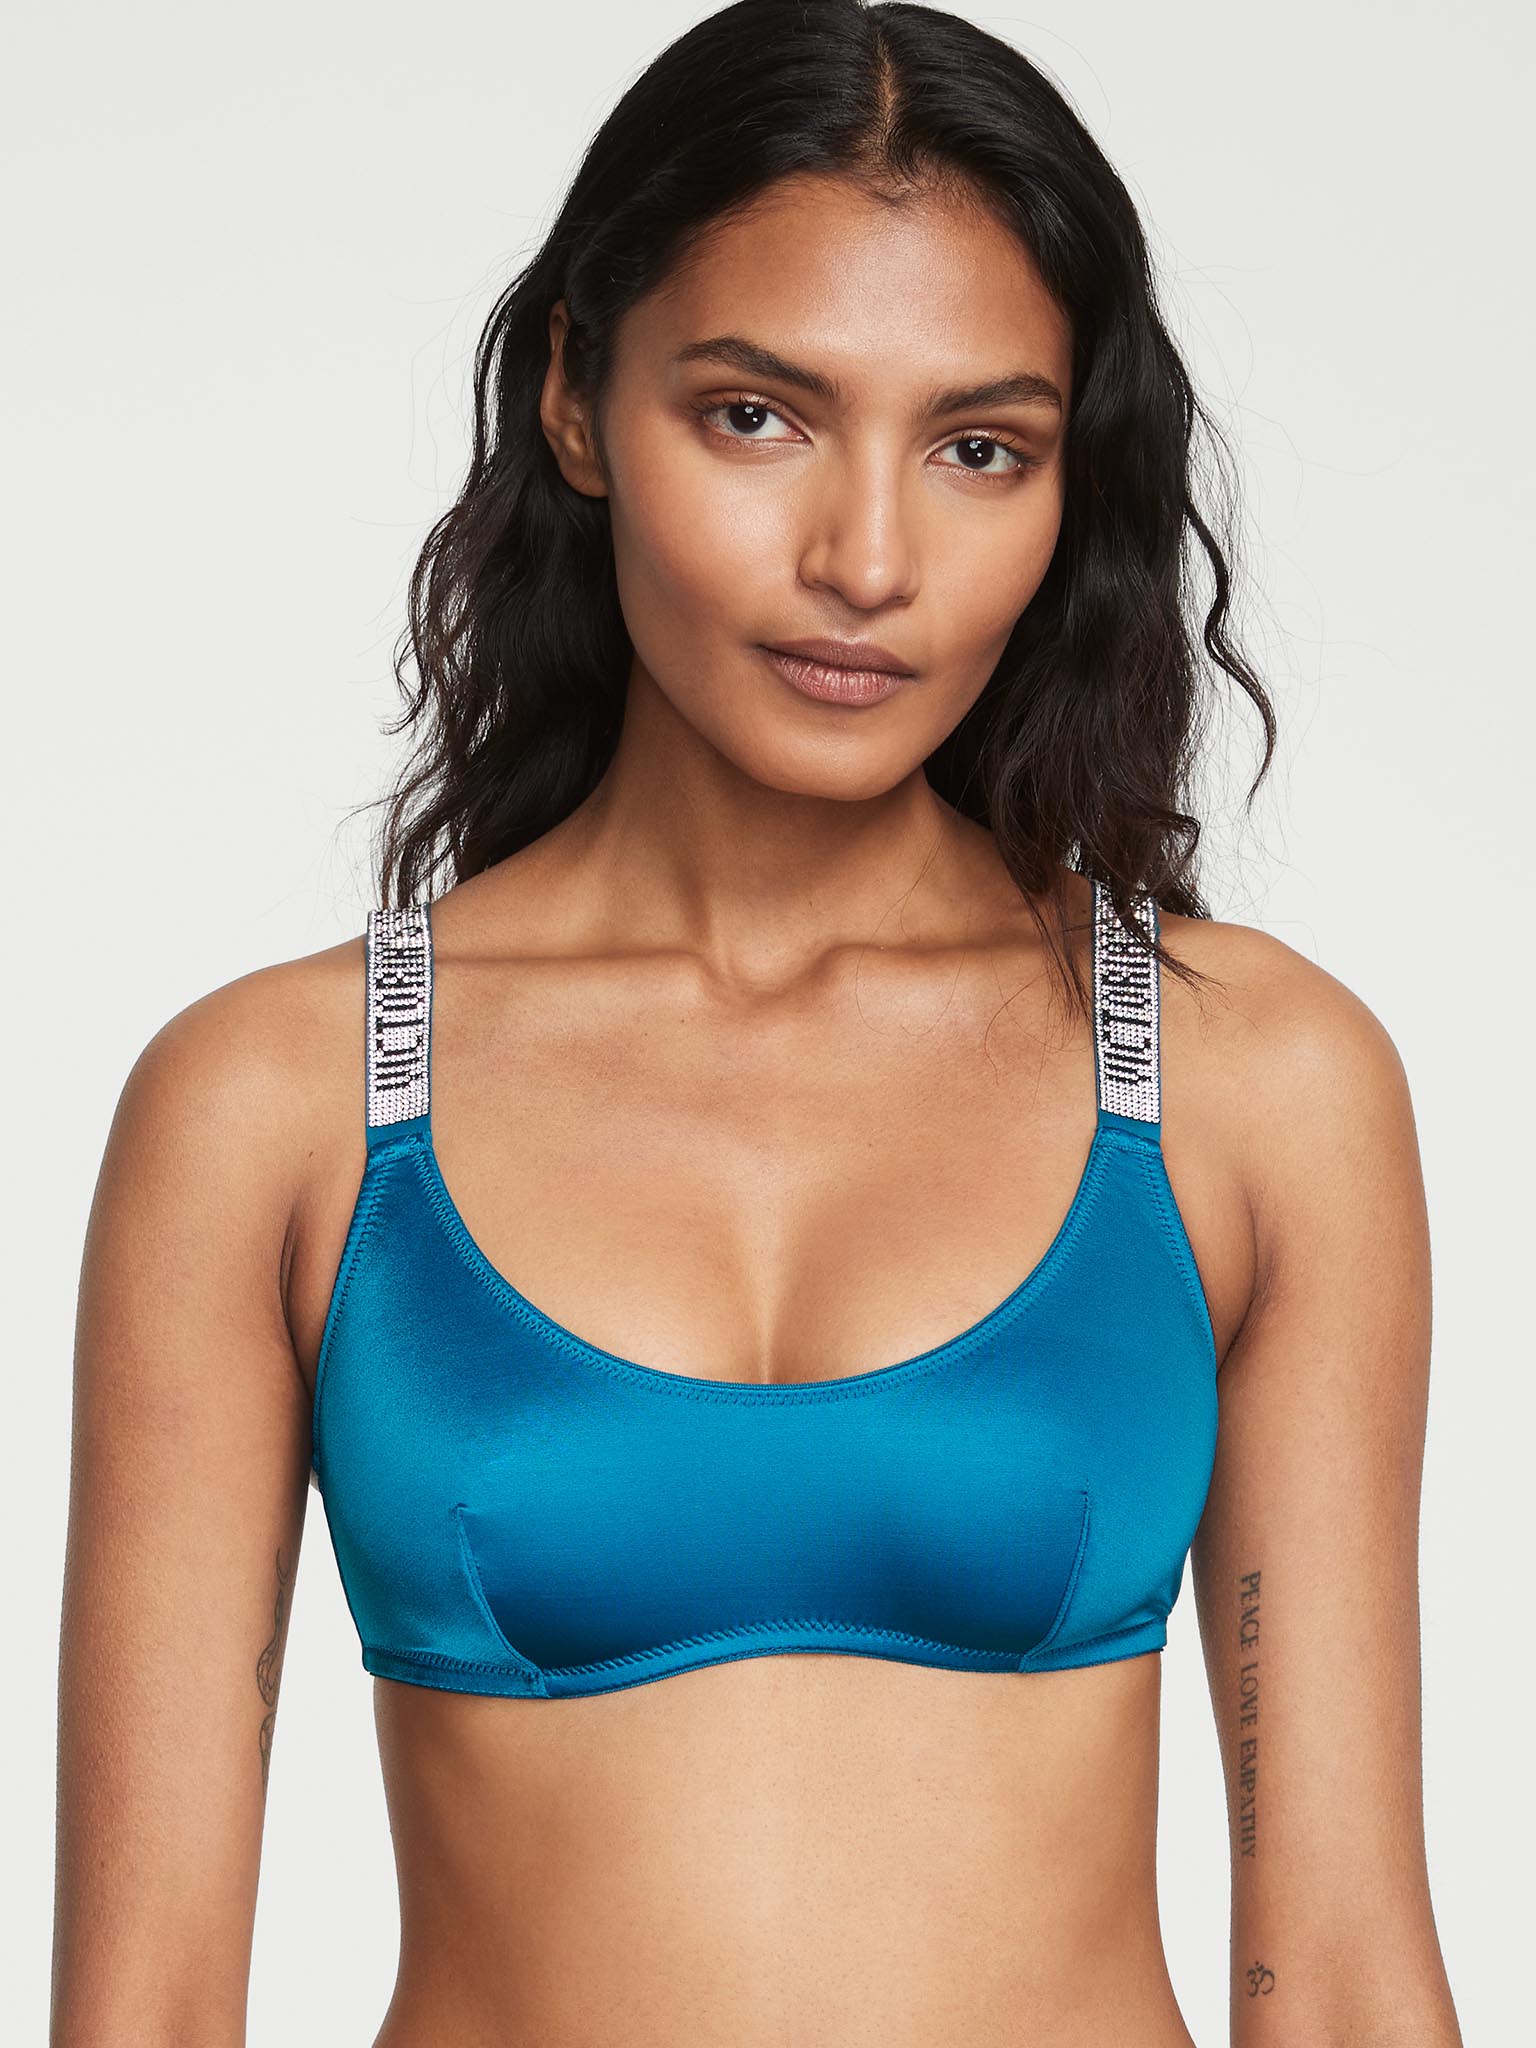 Victoria's Secret Singapore, Introducing the Icon by Victoria's Secret Bra.  You asked for a personalised fit? You got it. Featuring custom-lift  technology that chan